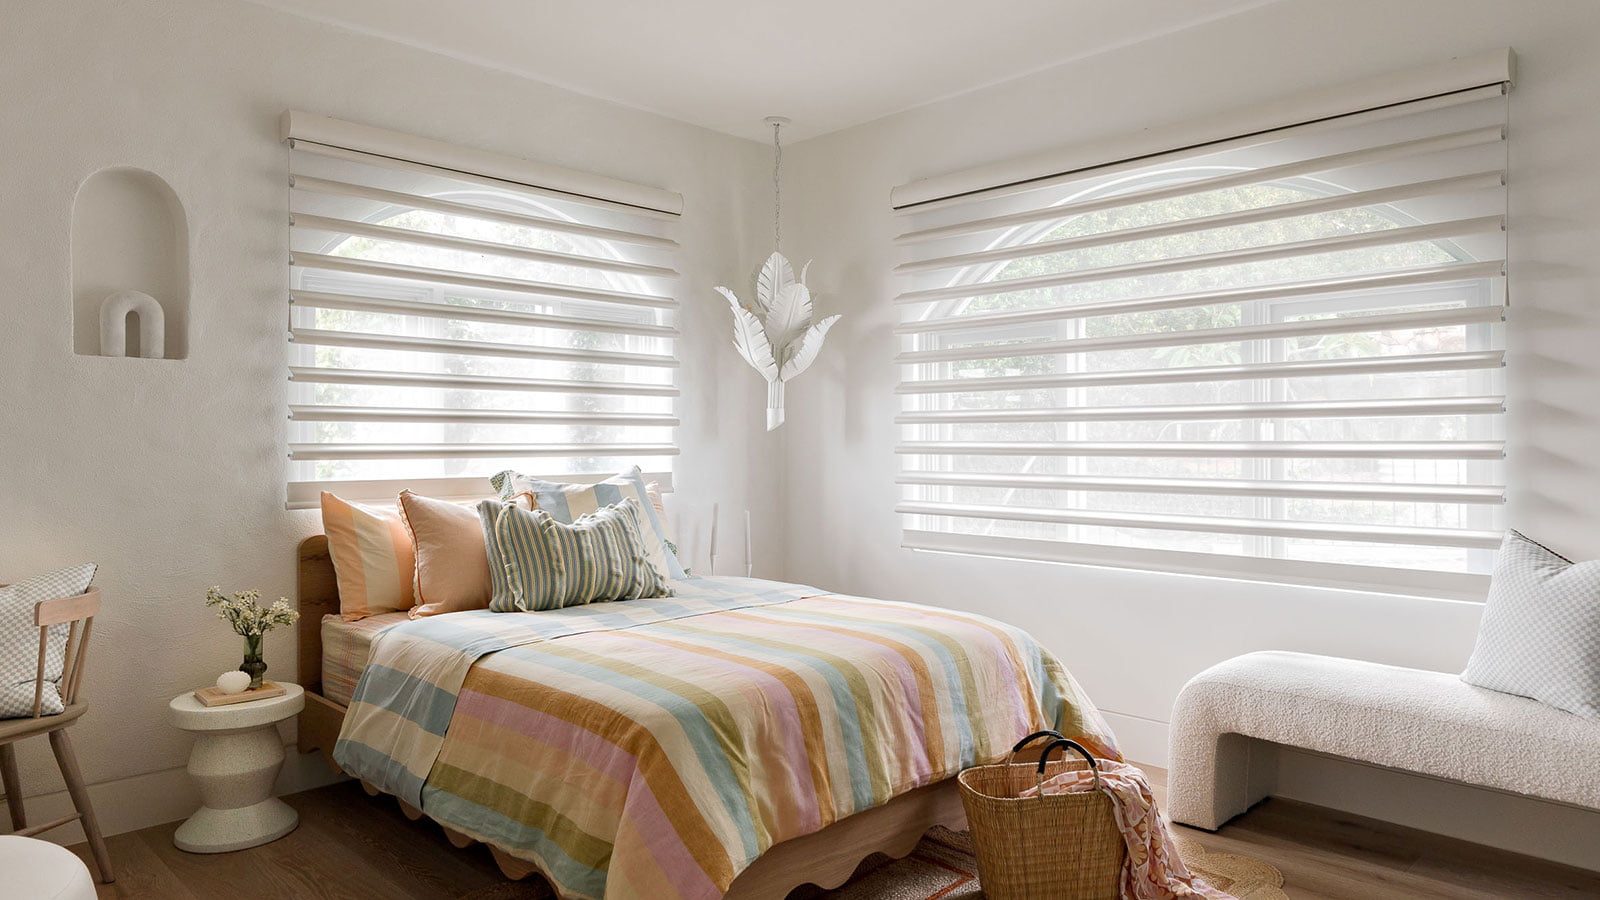 What to look for when choosing environmentally friendly window coverings for your home